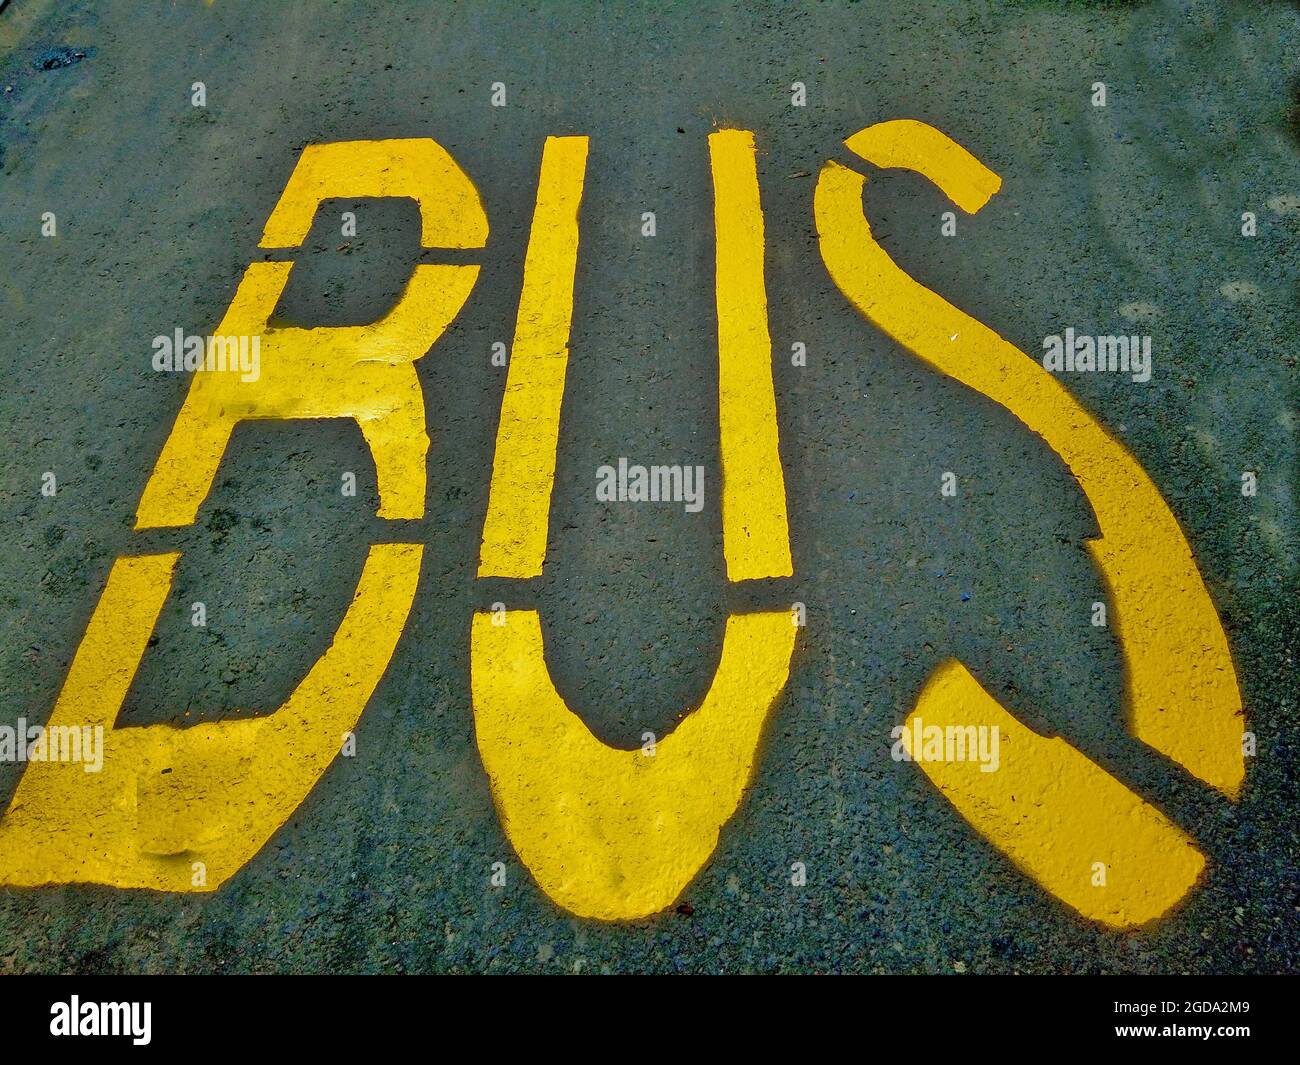 the word bus painted in a station on asphalt Stock Photo